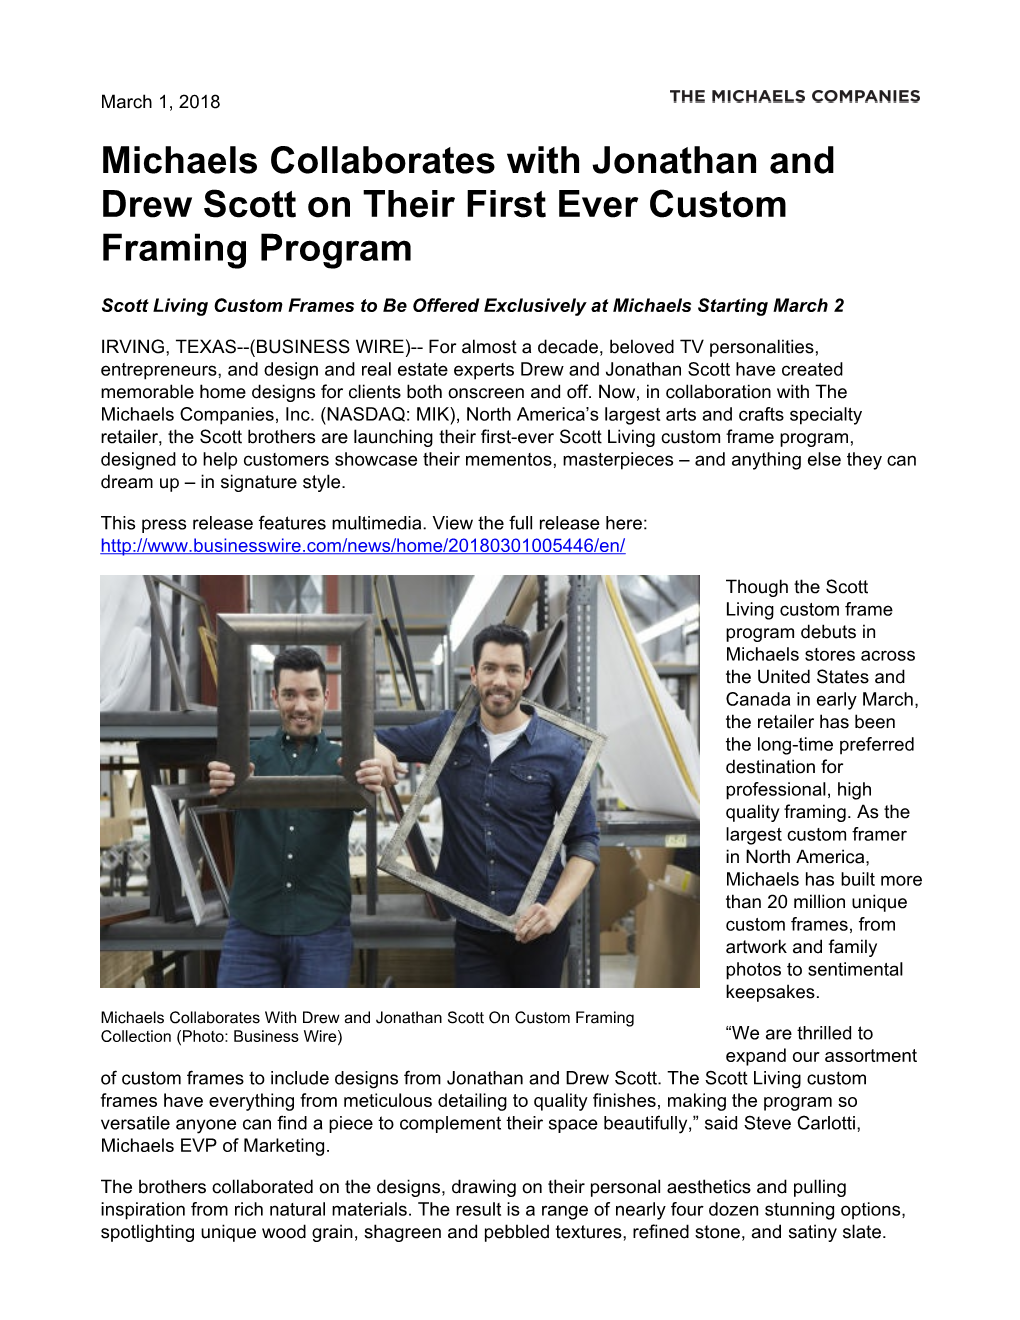 Michaels Collaborates with Jonathan and Drew Scott on Their First Ever Custom Framing Program